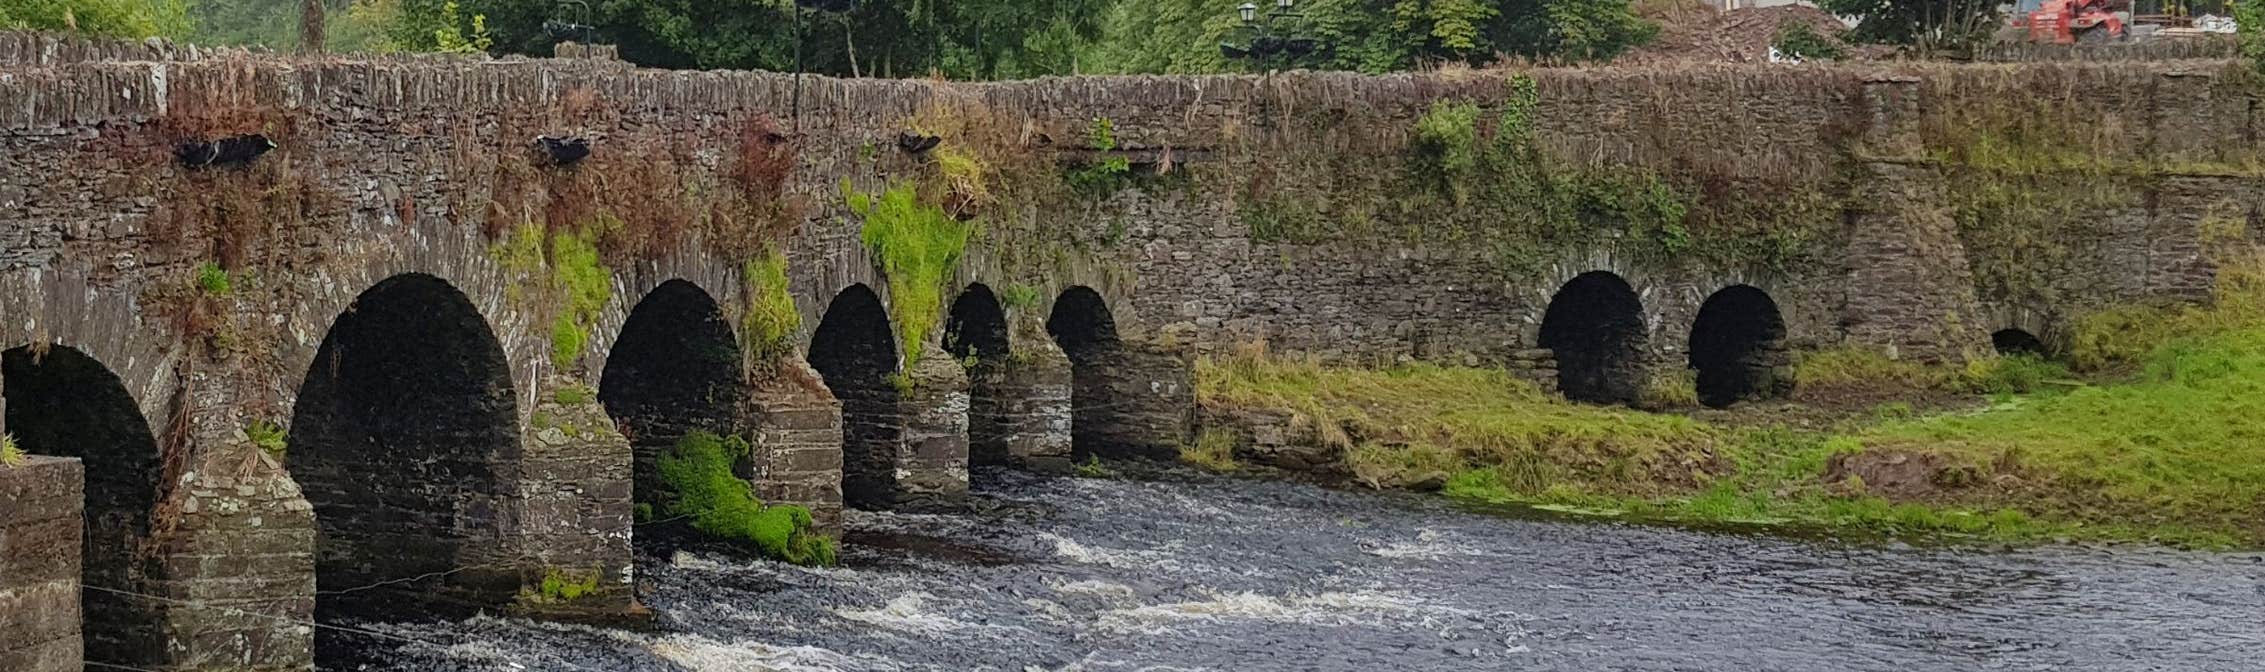 Image of a bridge in Dripsey in County Cork